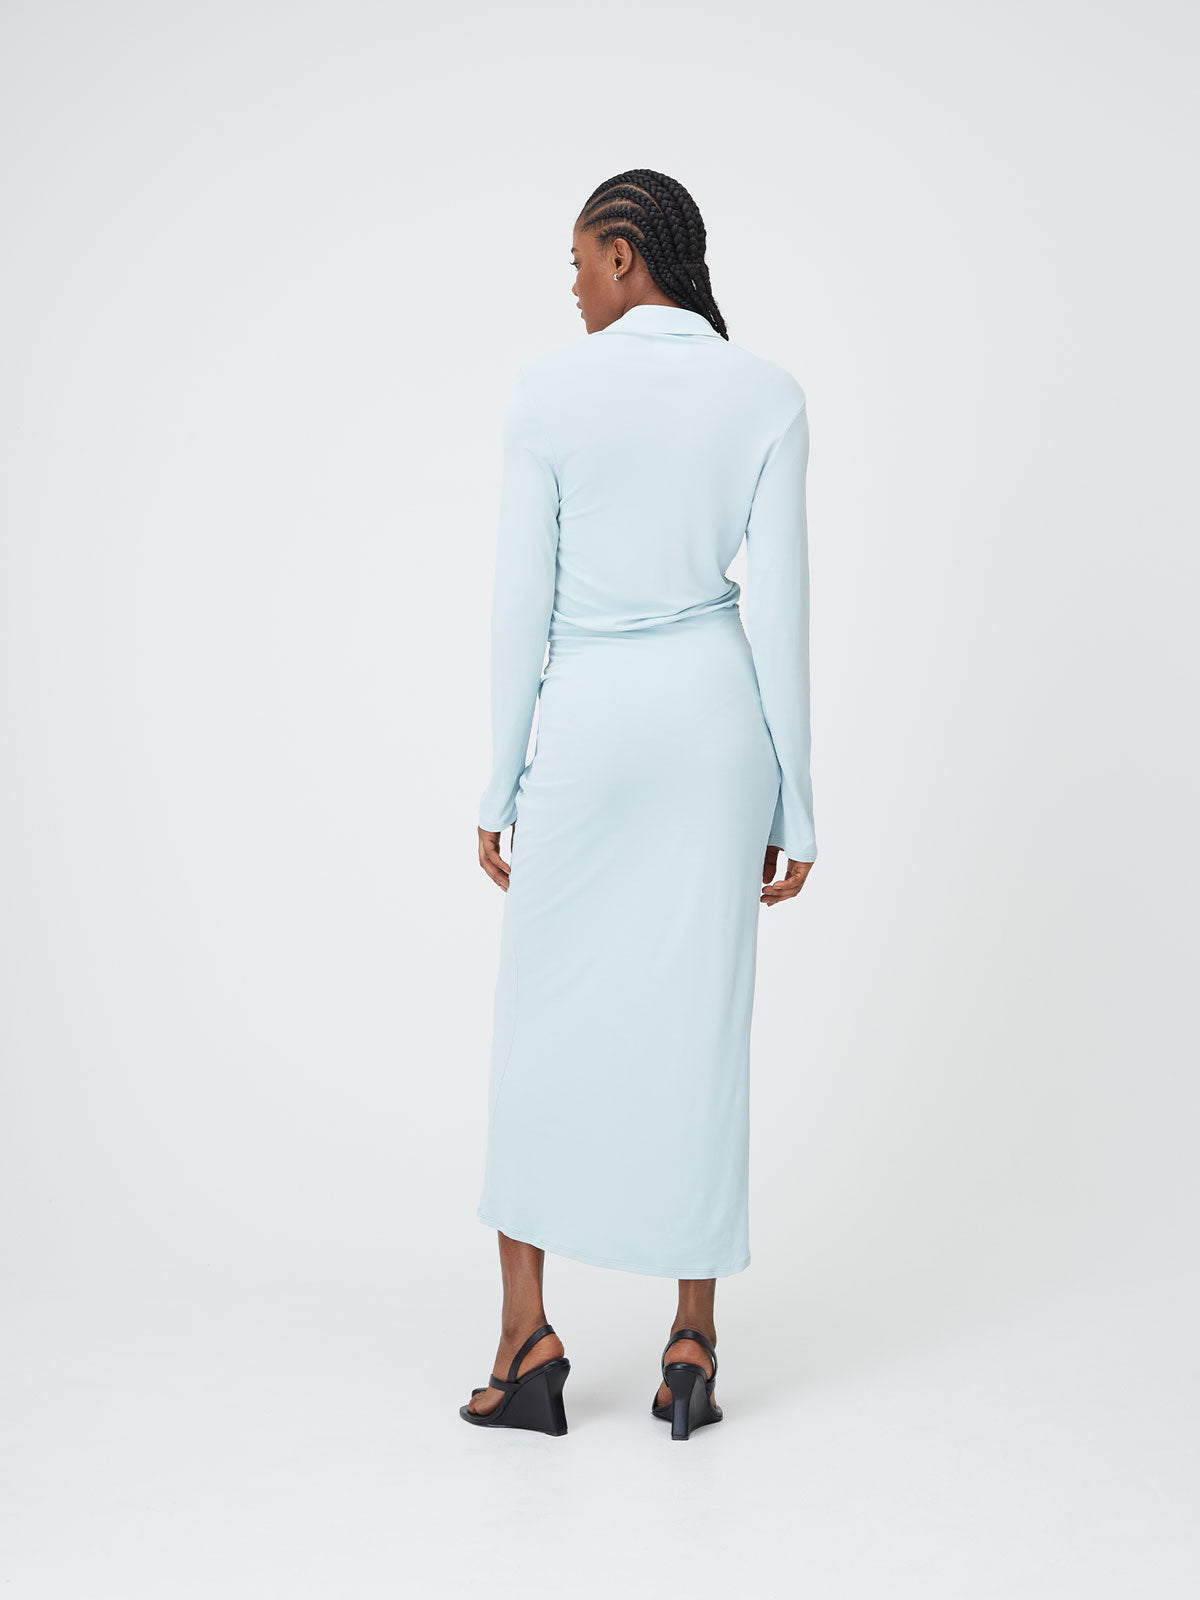 Back view of a female figure wearing the Mineral Blue 09 Slinky Shirt Dress on top of a white background